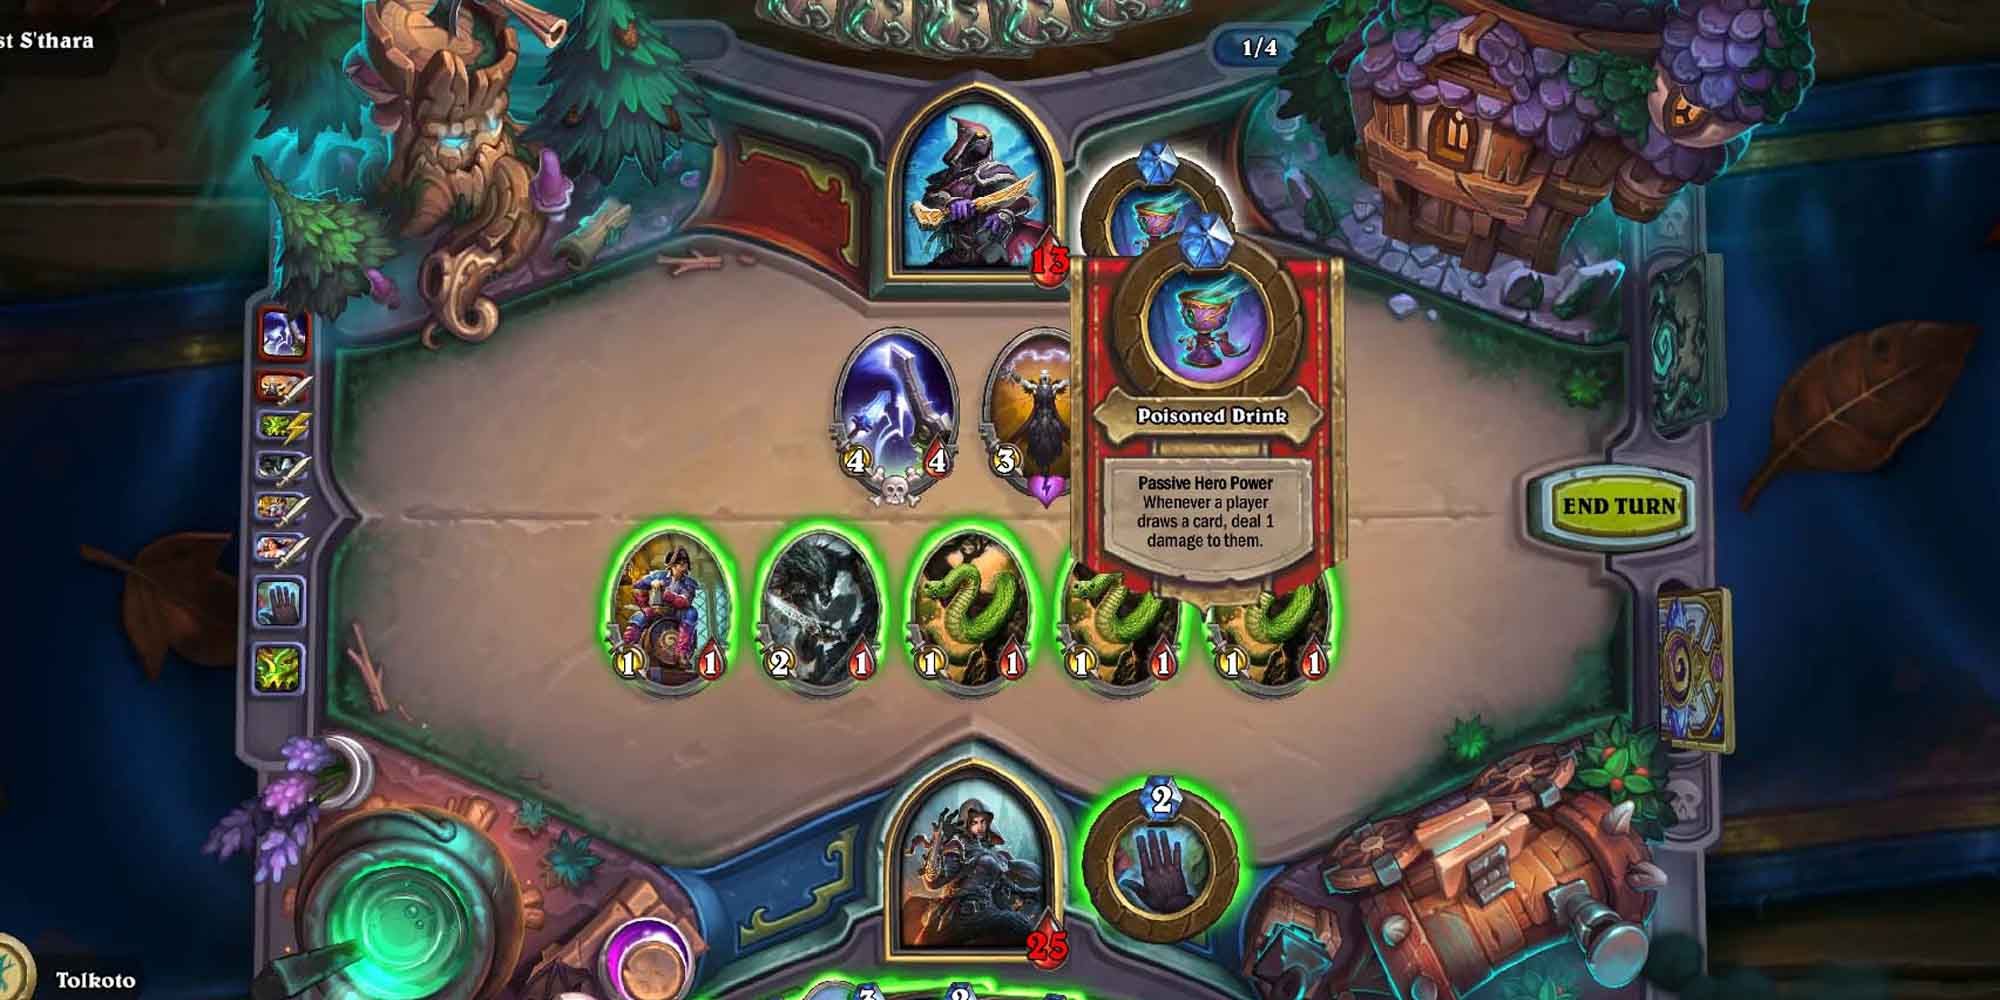 The digital collectible card game Hearthstone